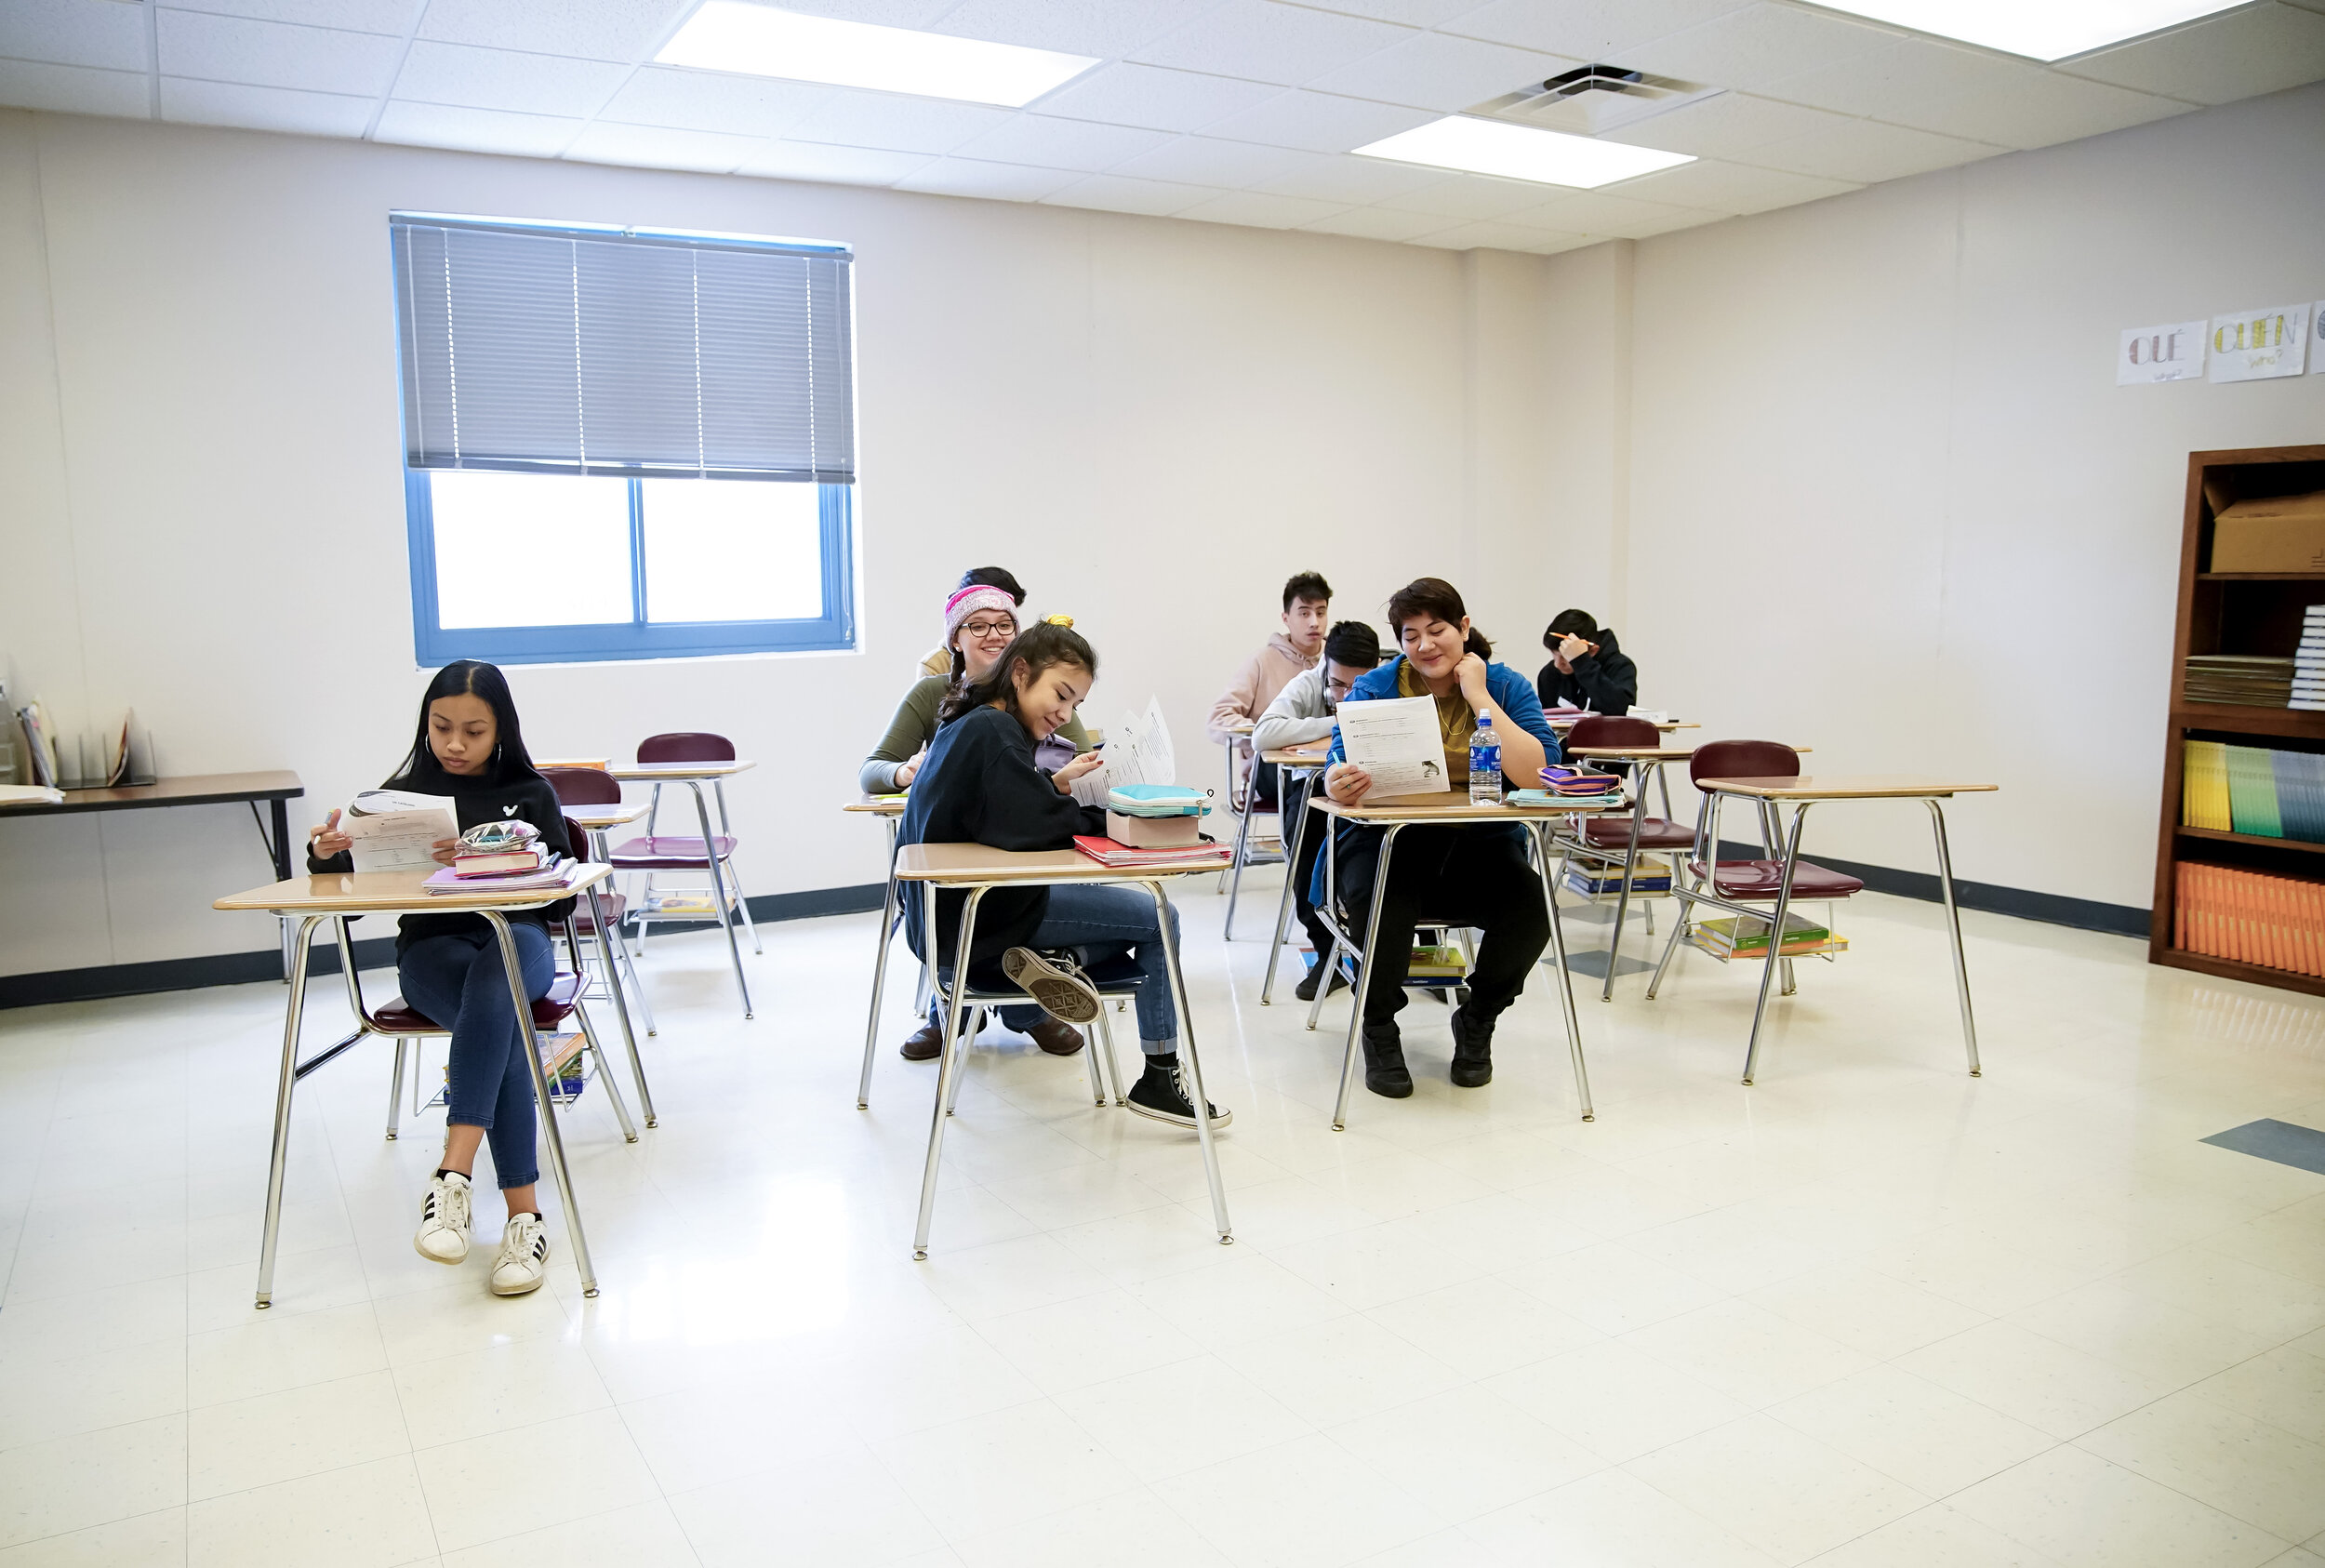   A classroom at West Liberty High School in West Liberty, IA. 2020. The town is in Muscatine County, Iowa, and as of the 2010 U.S. Census was the only city in the state to have a majority Hispanic population.  